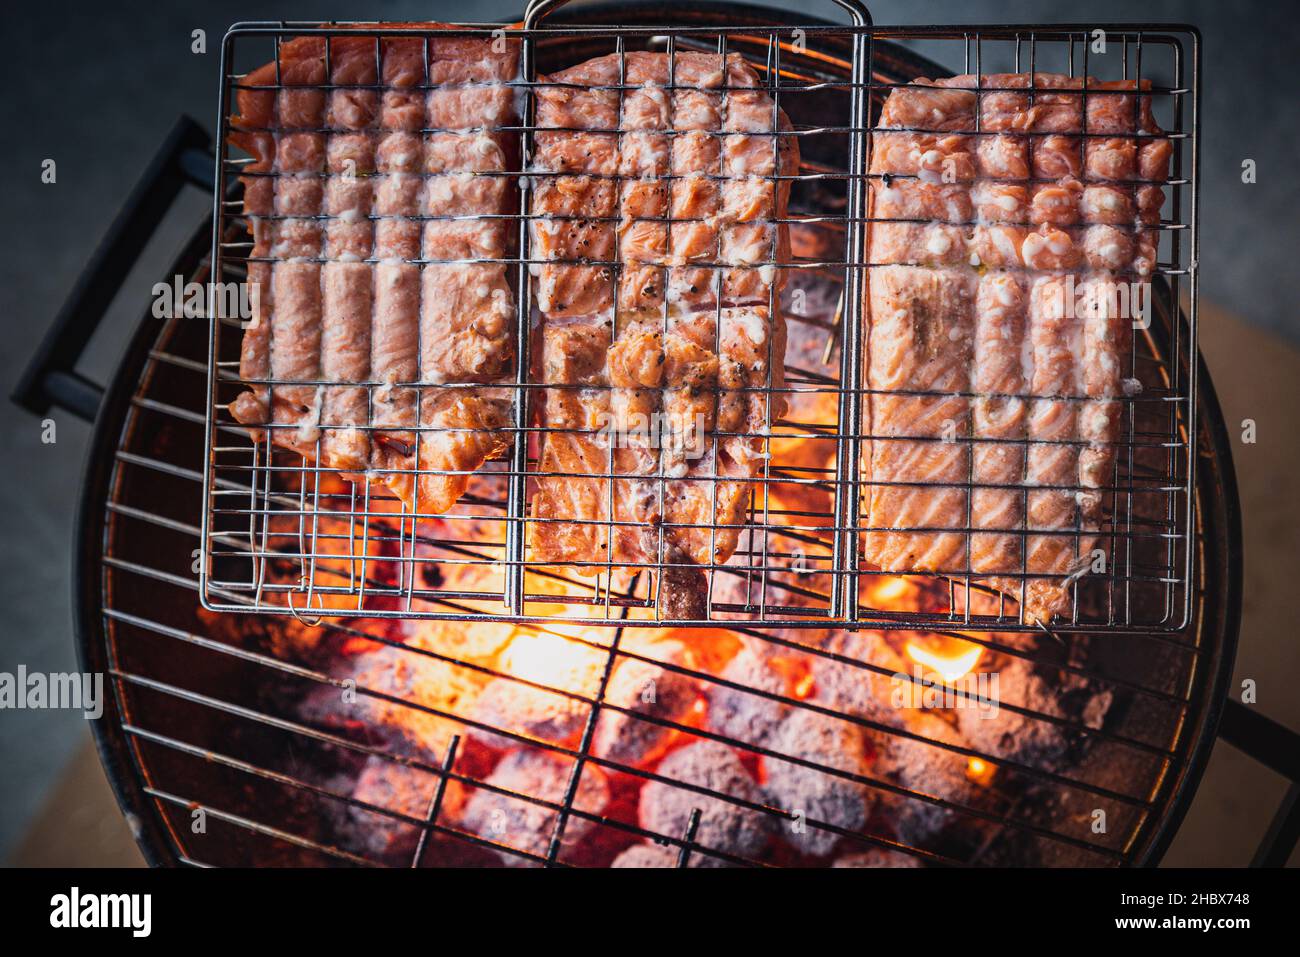 Barbecue detail with fresh row Salmon being grilled or roasted on burning hot carbons, viewed from above. BBQ melting fish in a grill on live fire Stock Photo